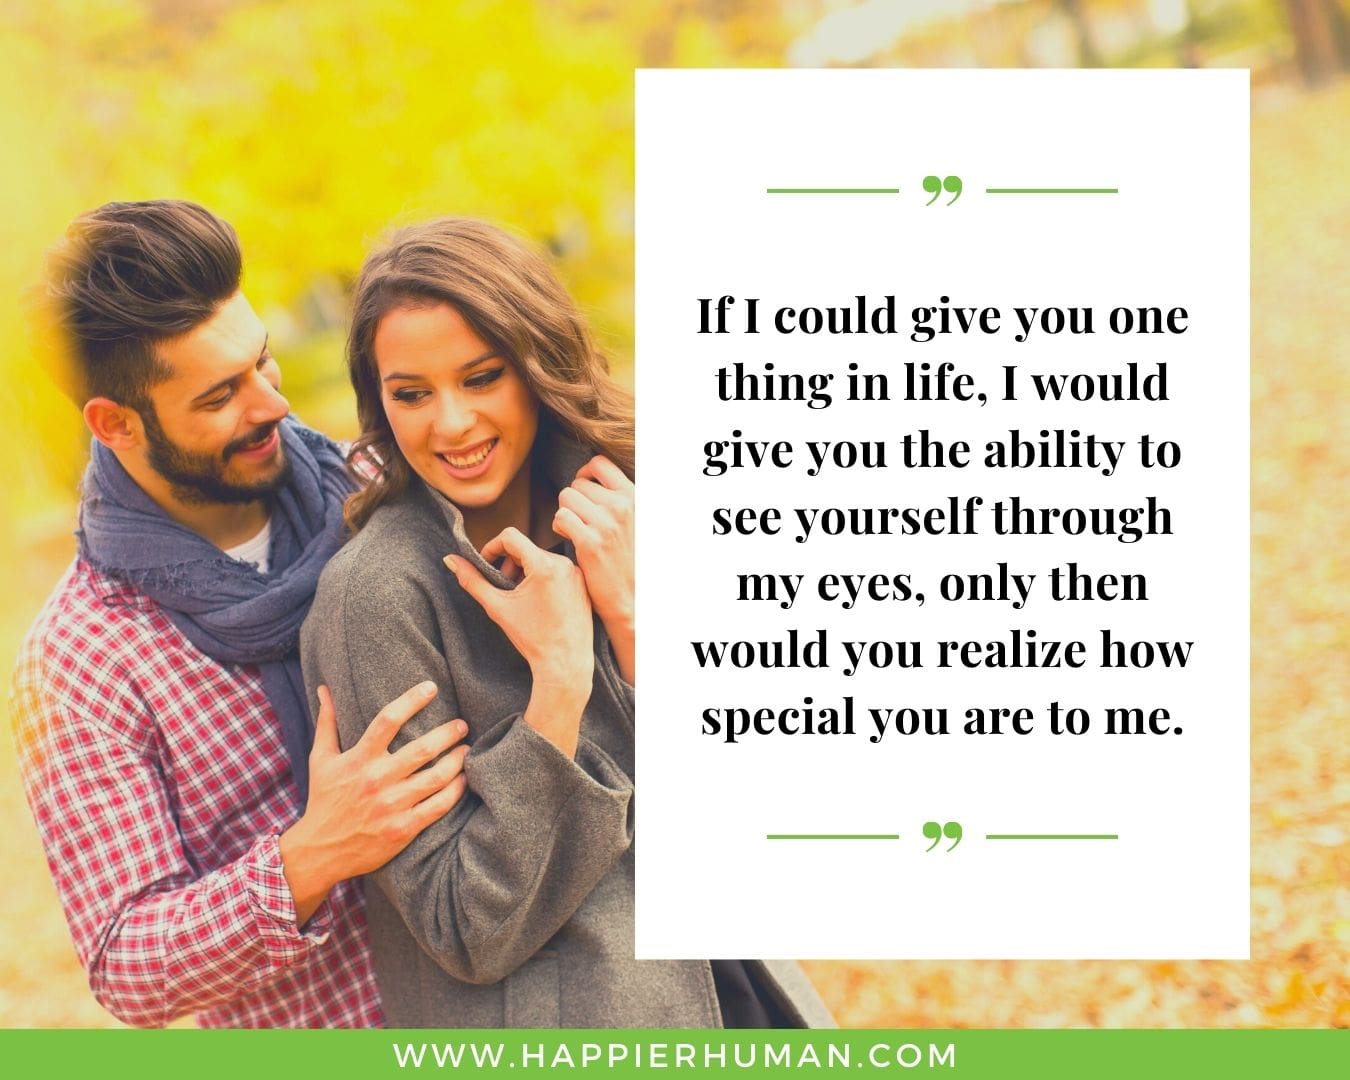 Words of Romantic Love for Her - “If I could give you one thing in life, I would give you the ability to see yourself through my eyes, only then would you realize how special you are to me.”